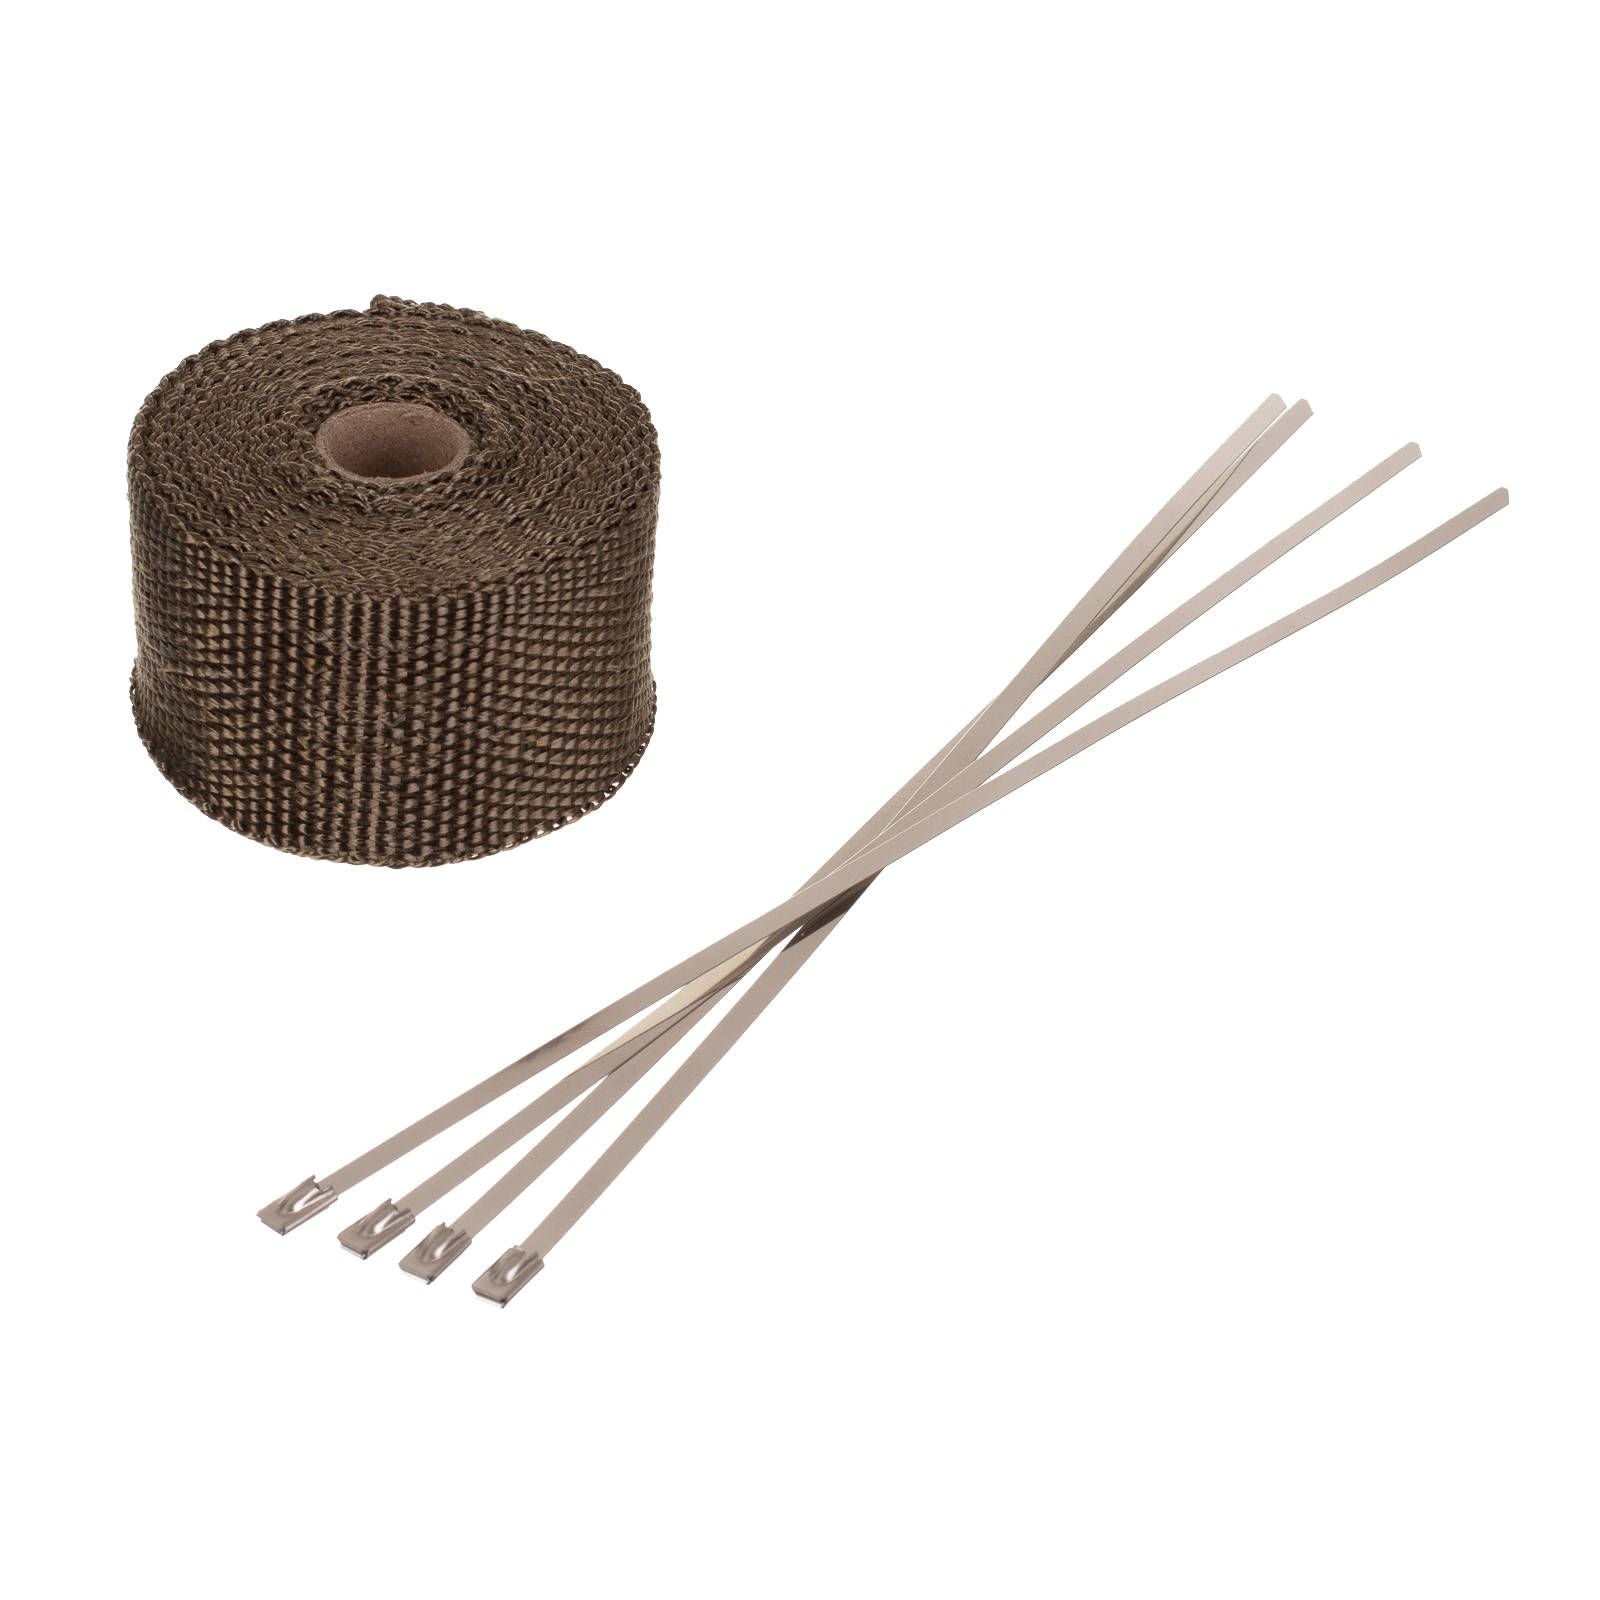 New WHITES Exhaust Wrap Gold 50mm (5M Roll) - With 4 S/S Ties #WPEXWG5